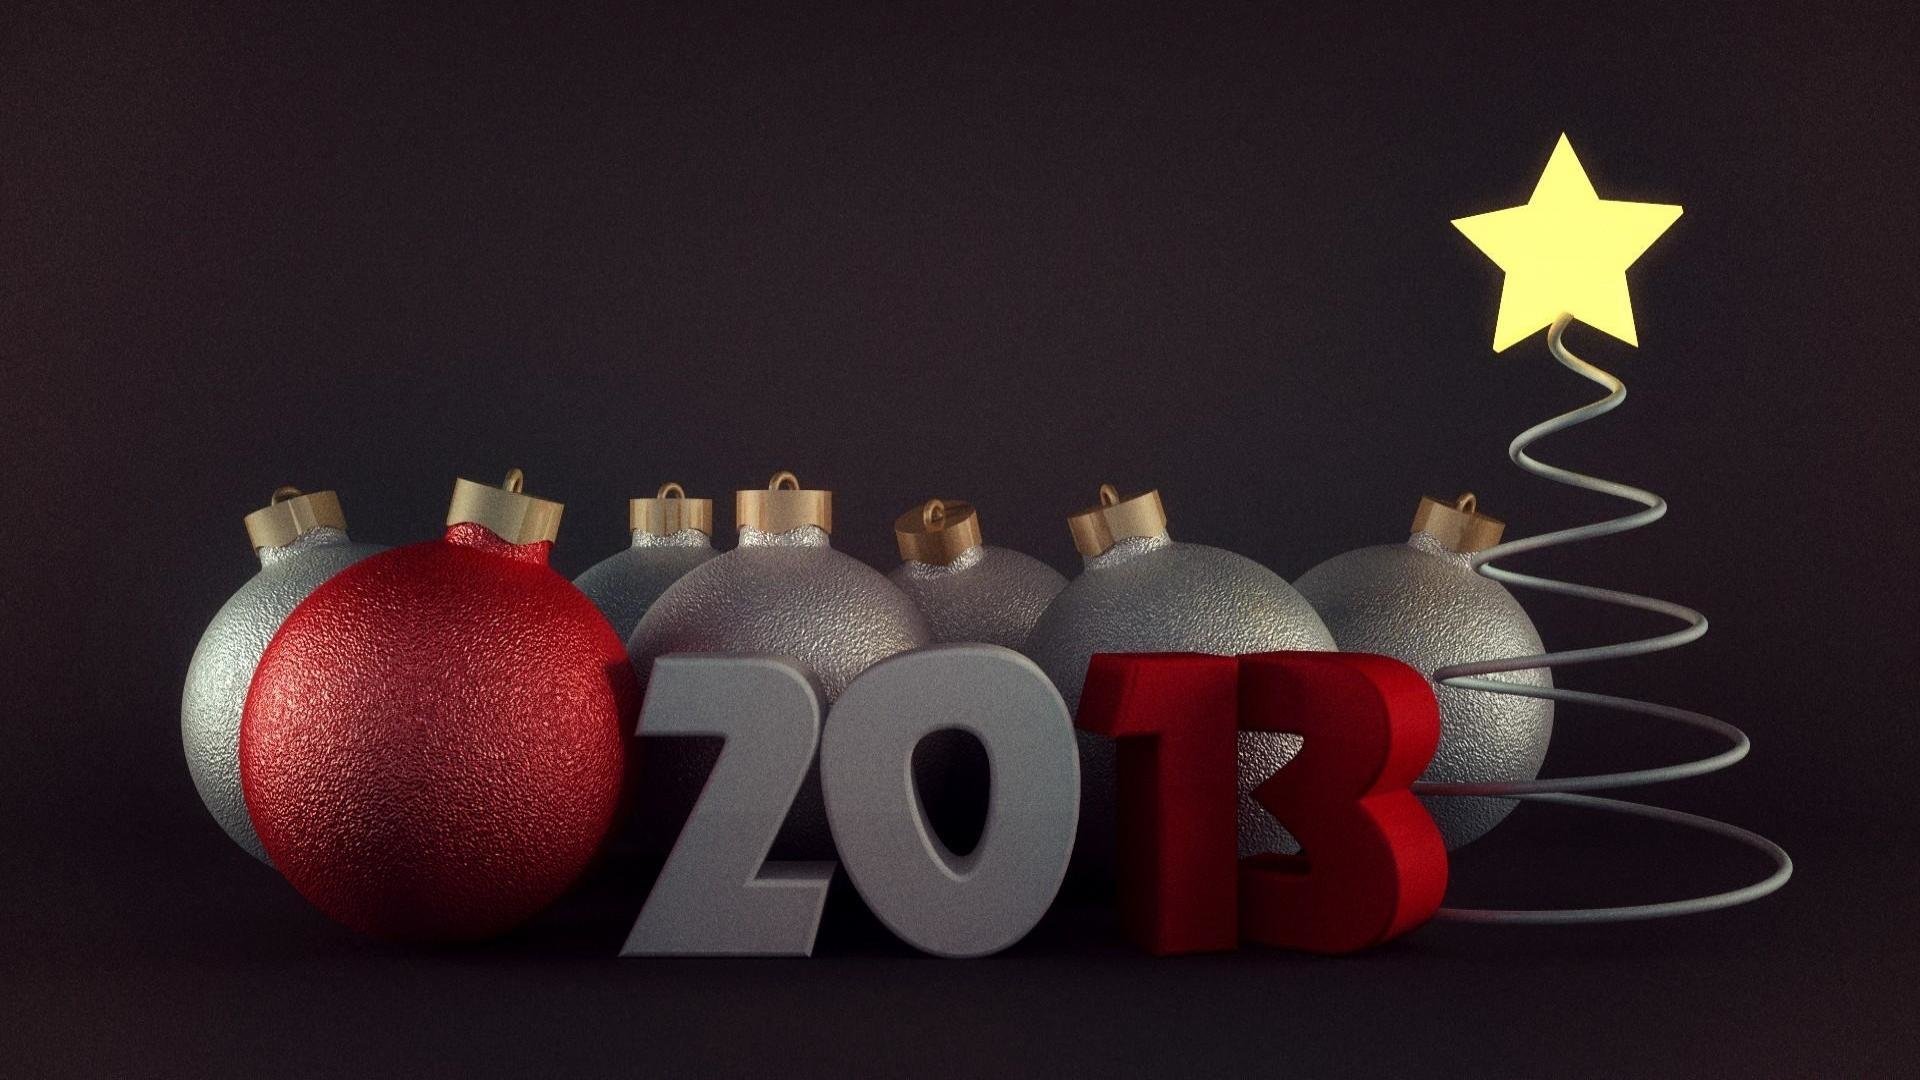 Best New Year 2013 wallpaper ID:115023 for High Resolution hd 1920x1080 computer